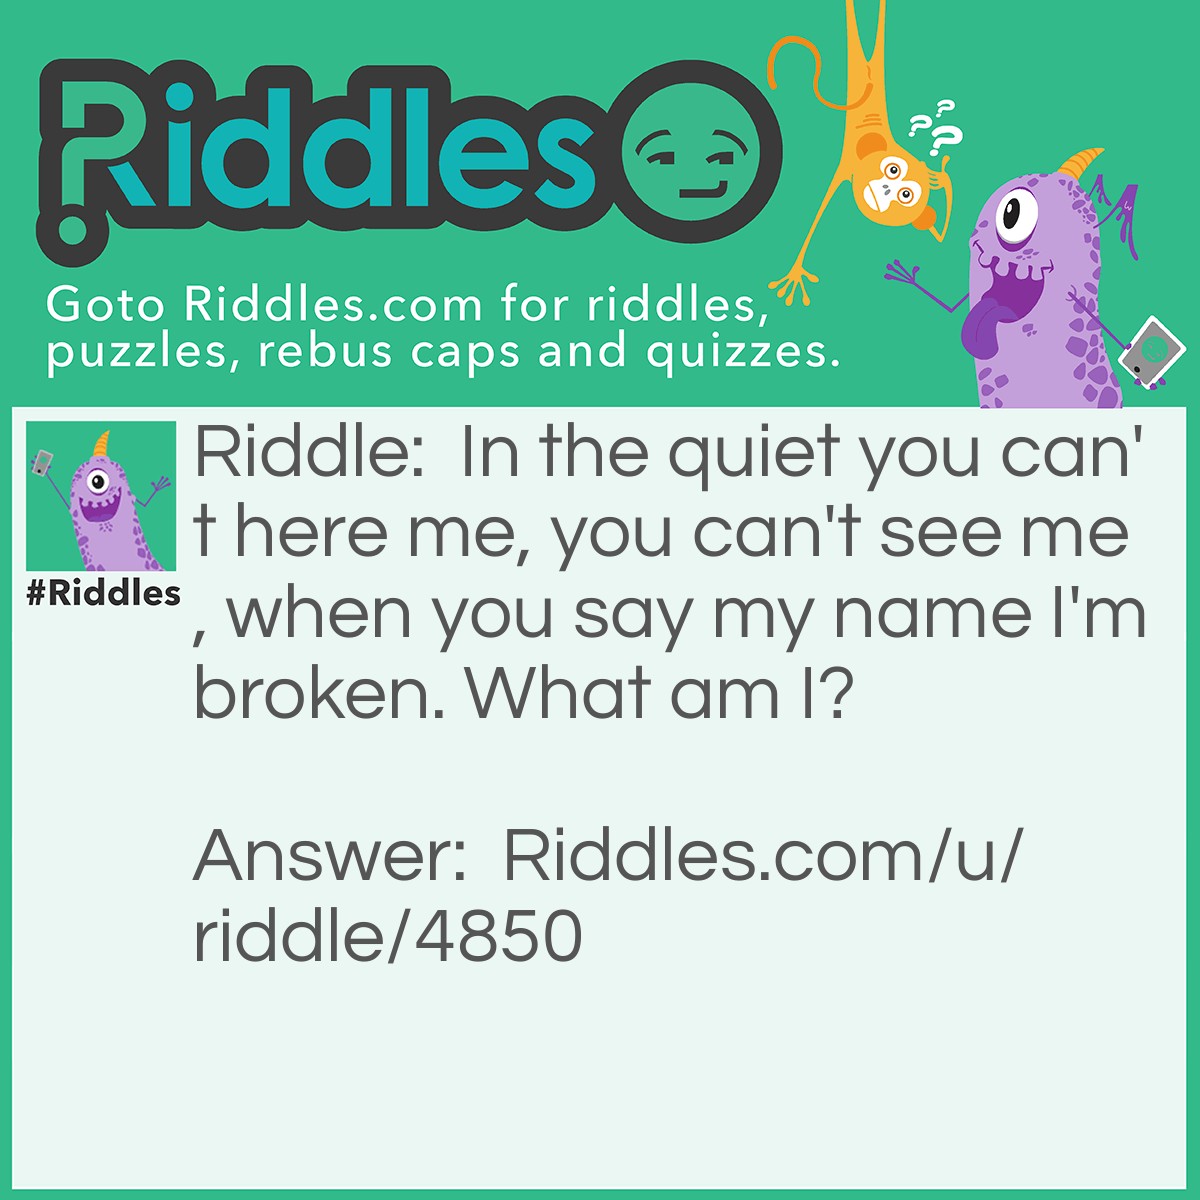 Riddle: In the quiet you can't here me, you can't see me, when you say my name I'm broken. What am I? Answer: SILENCE..........